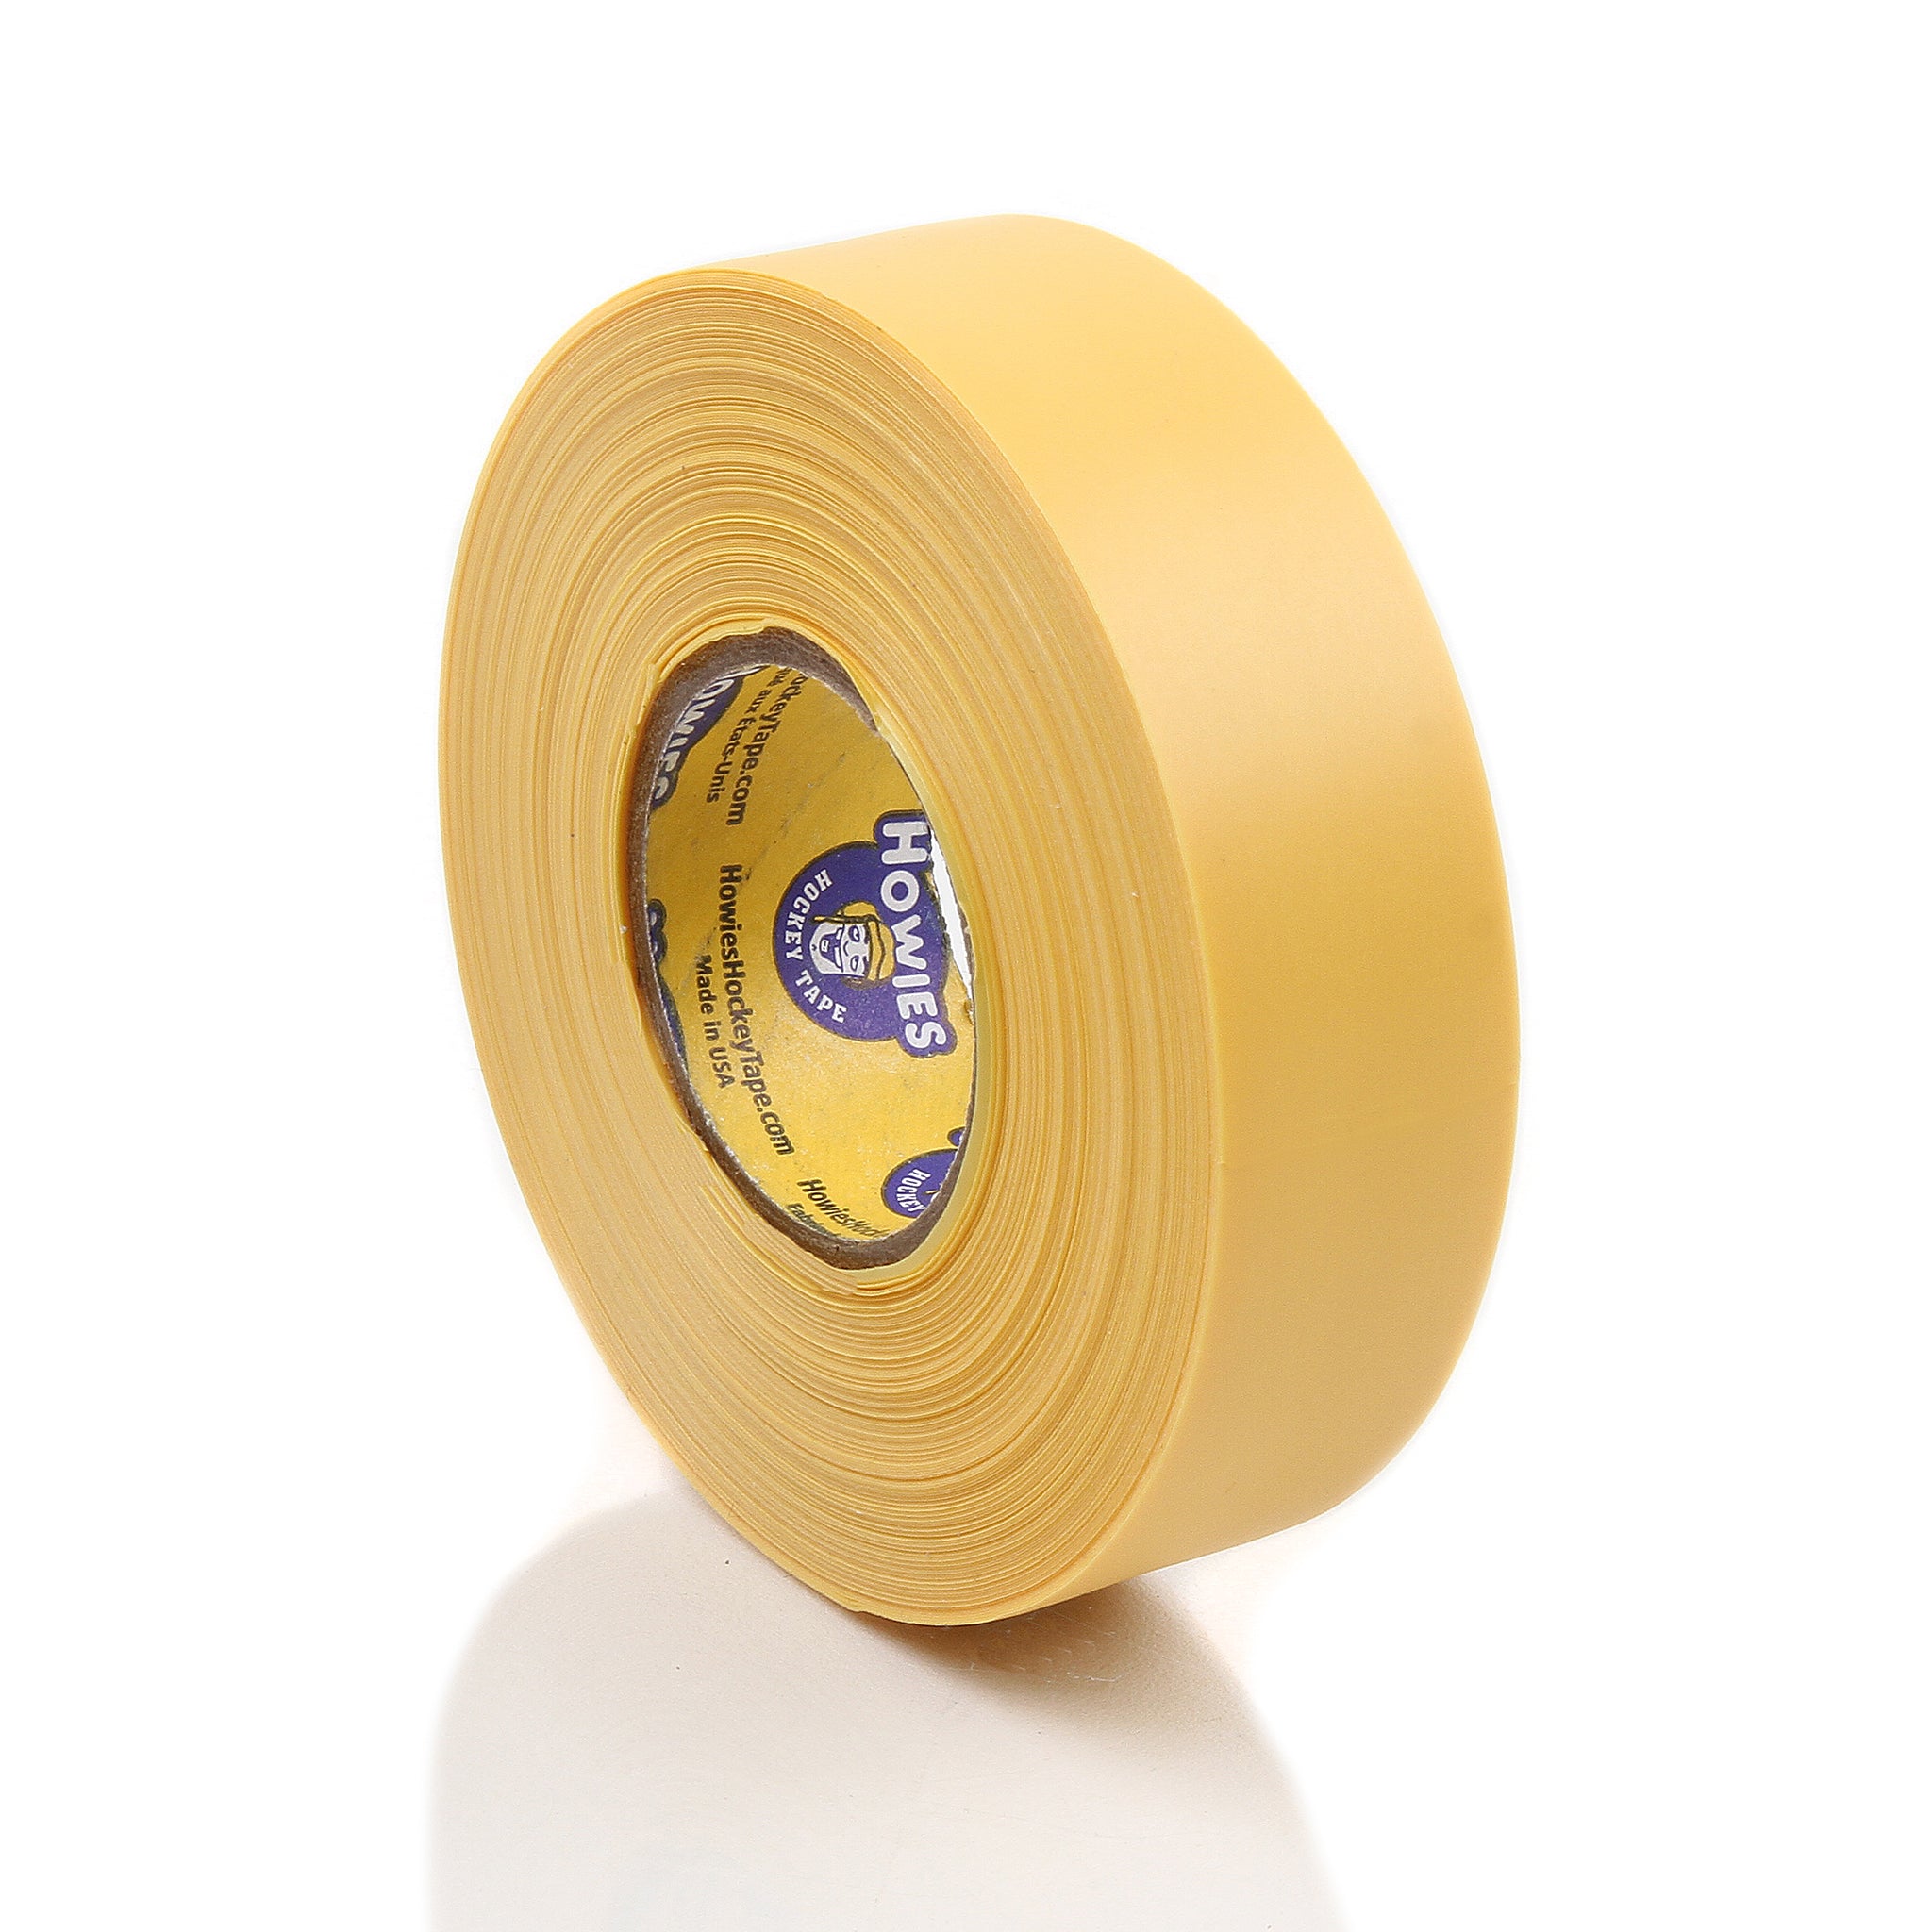 Clear Hockey Tape. Shin Pad Sock Tape, Rips Easily, 5 Pack. SportsTape -  Hockey Sock Tape Used by The pros - Made in USA